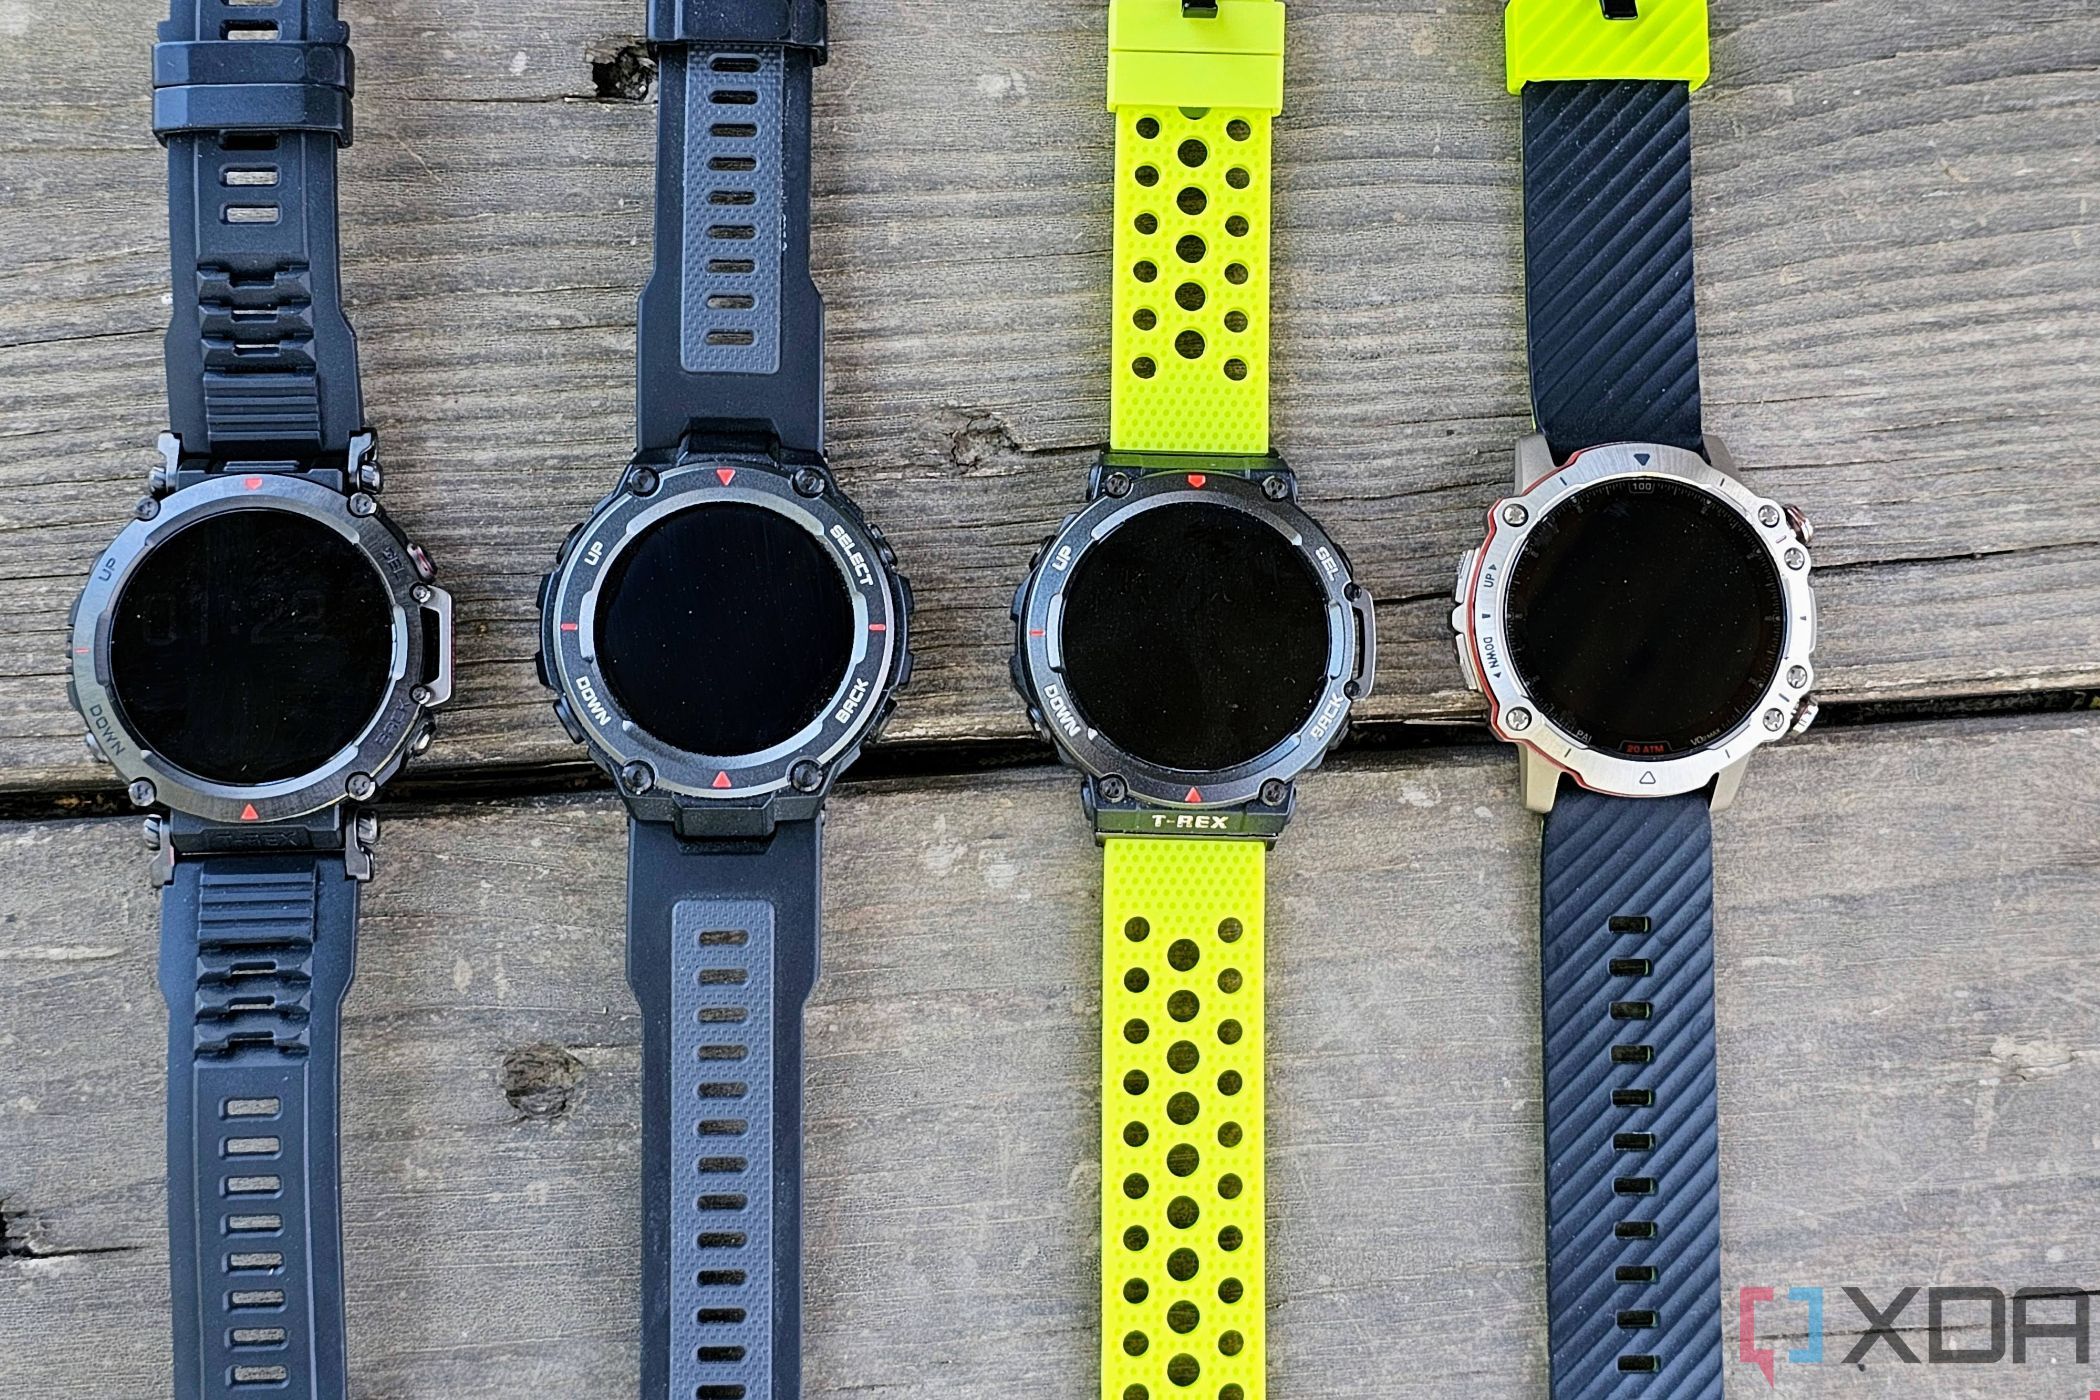 Amazfit T-Rex Ultra arrives with reinforced casing, freediving